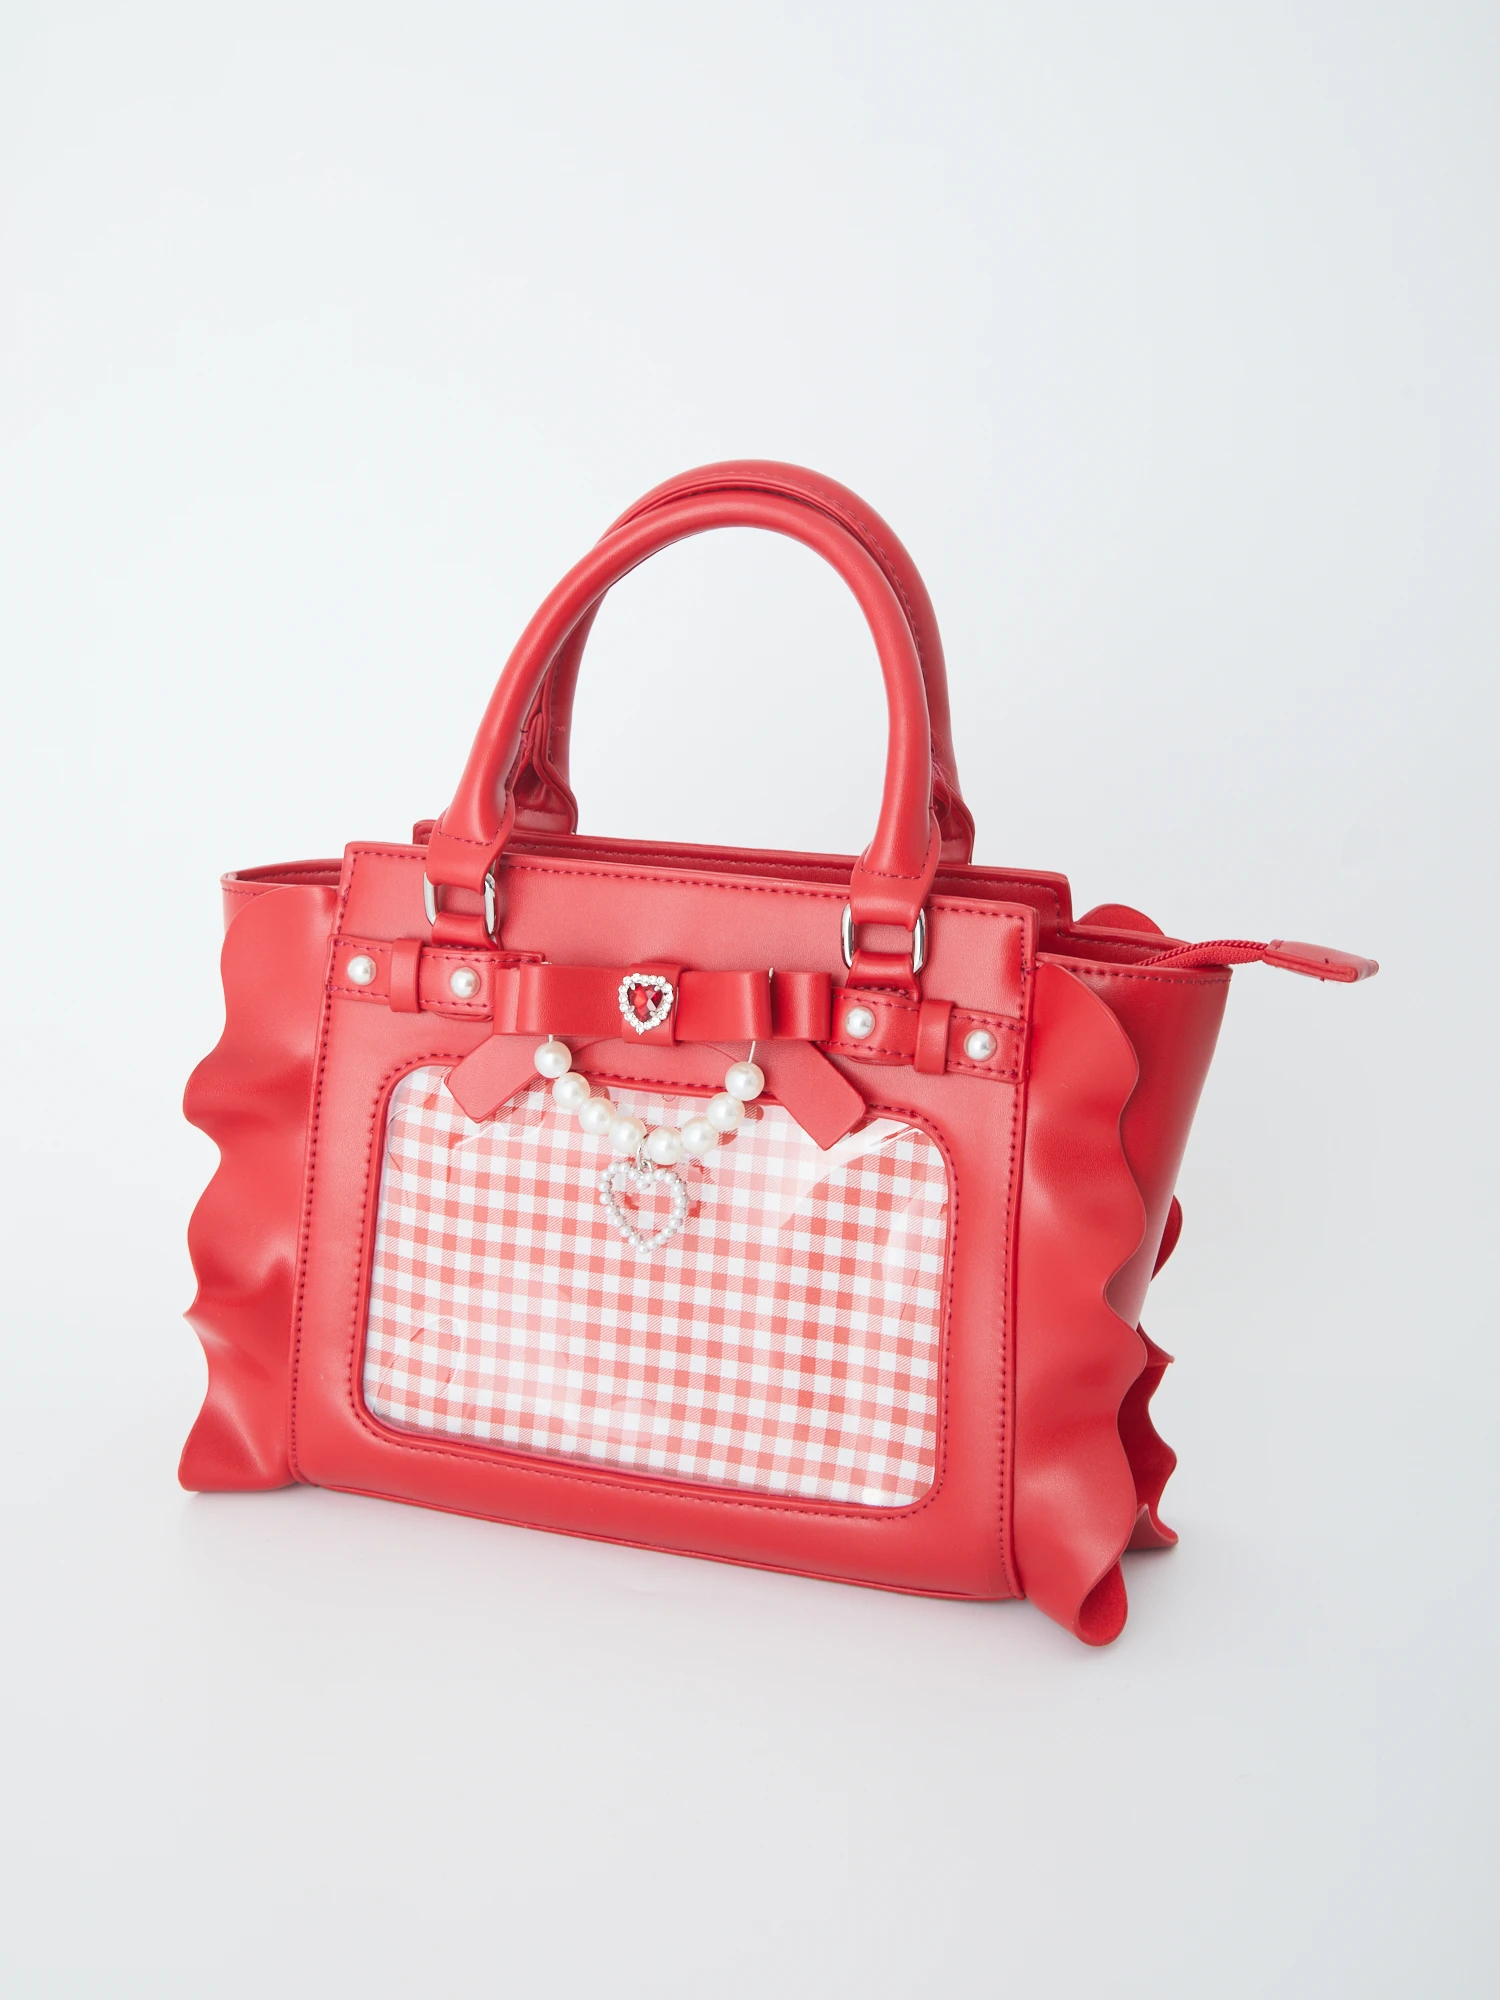 Ank Rouge 確定ファンサのおまじないbag レッド